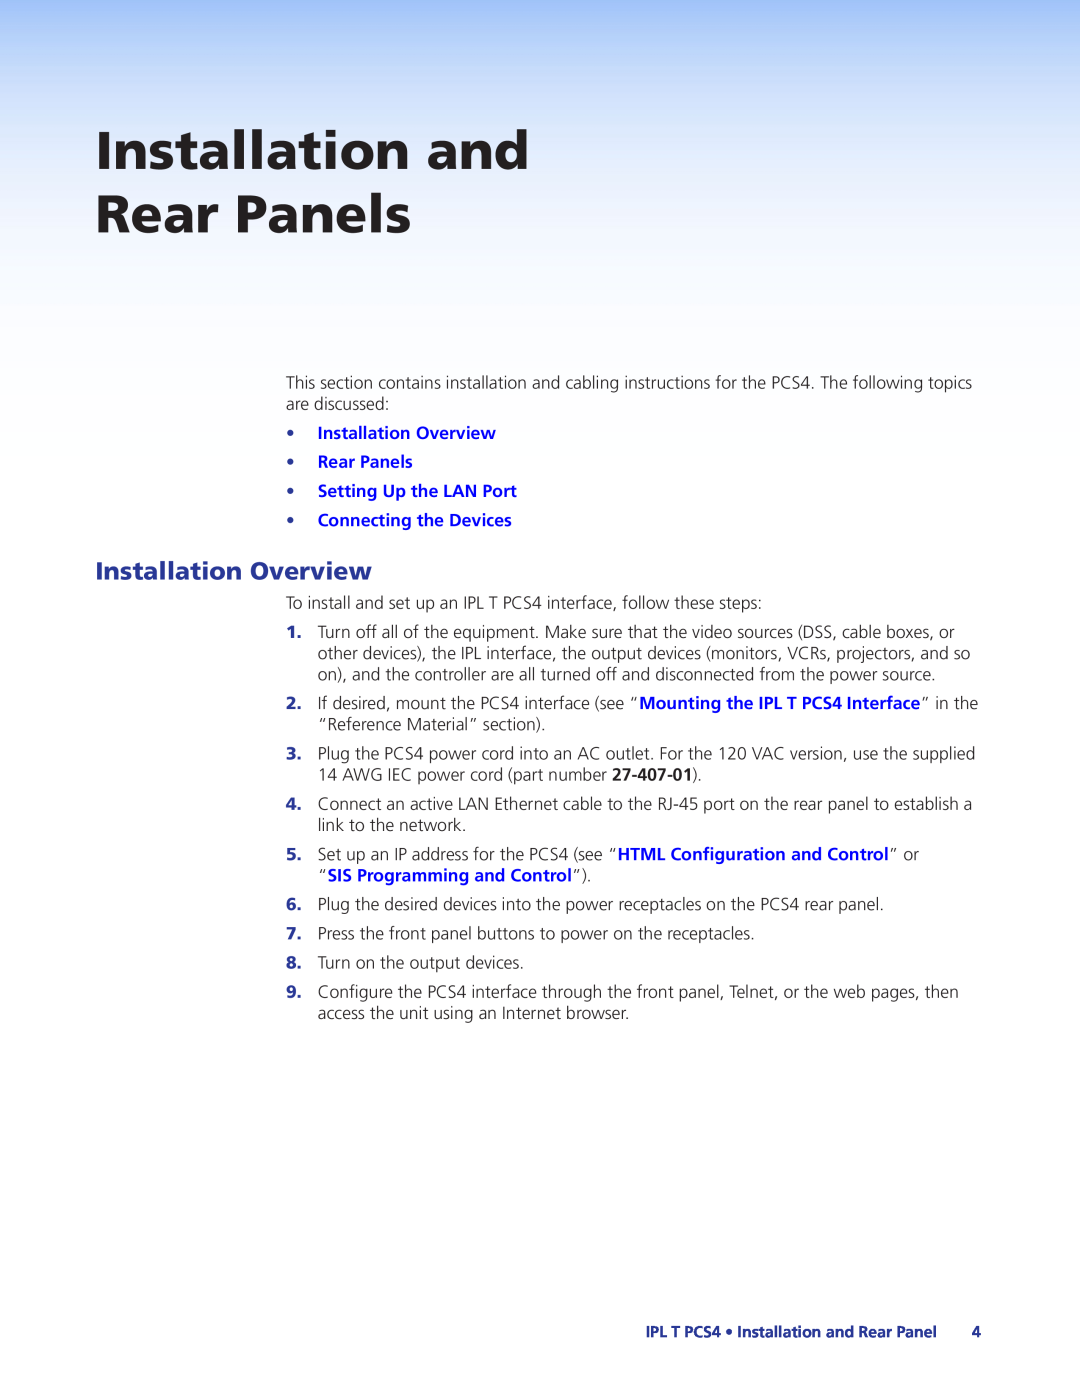 Extron electronic IPL T PCS4i manual Installation and Rear Panels, Installation Overview, Connecting the Devices 